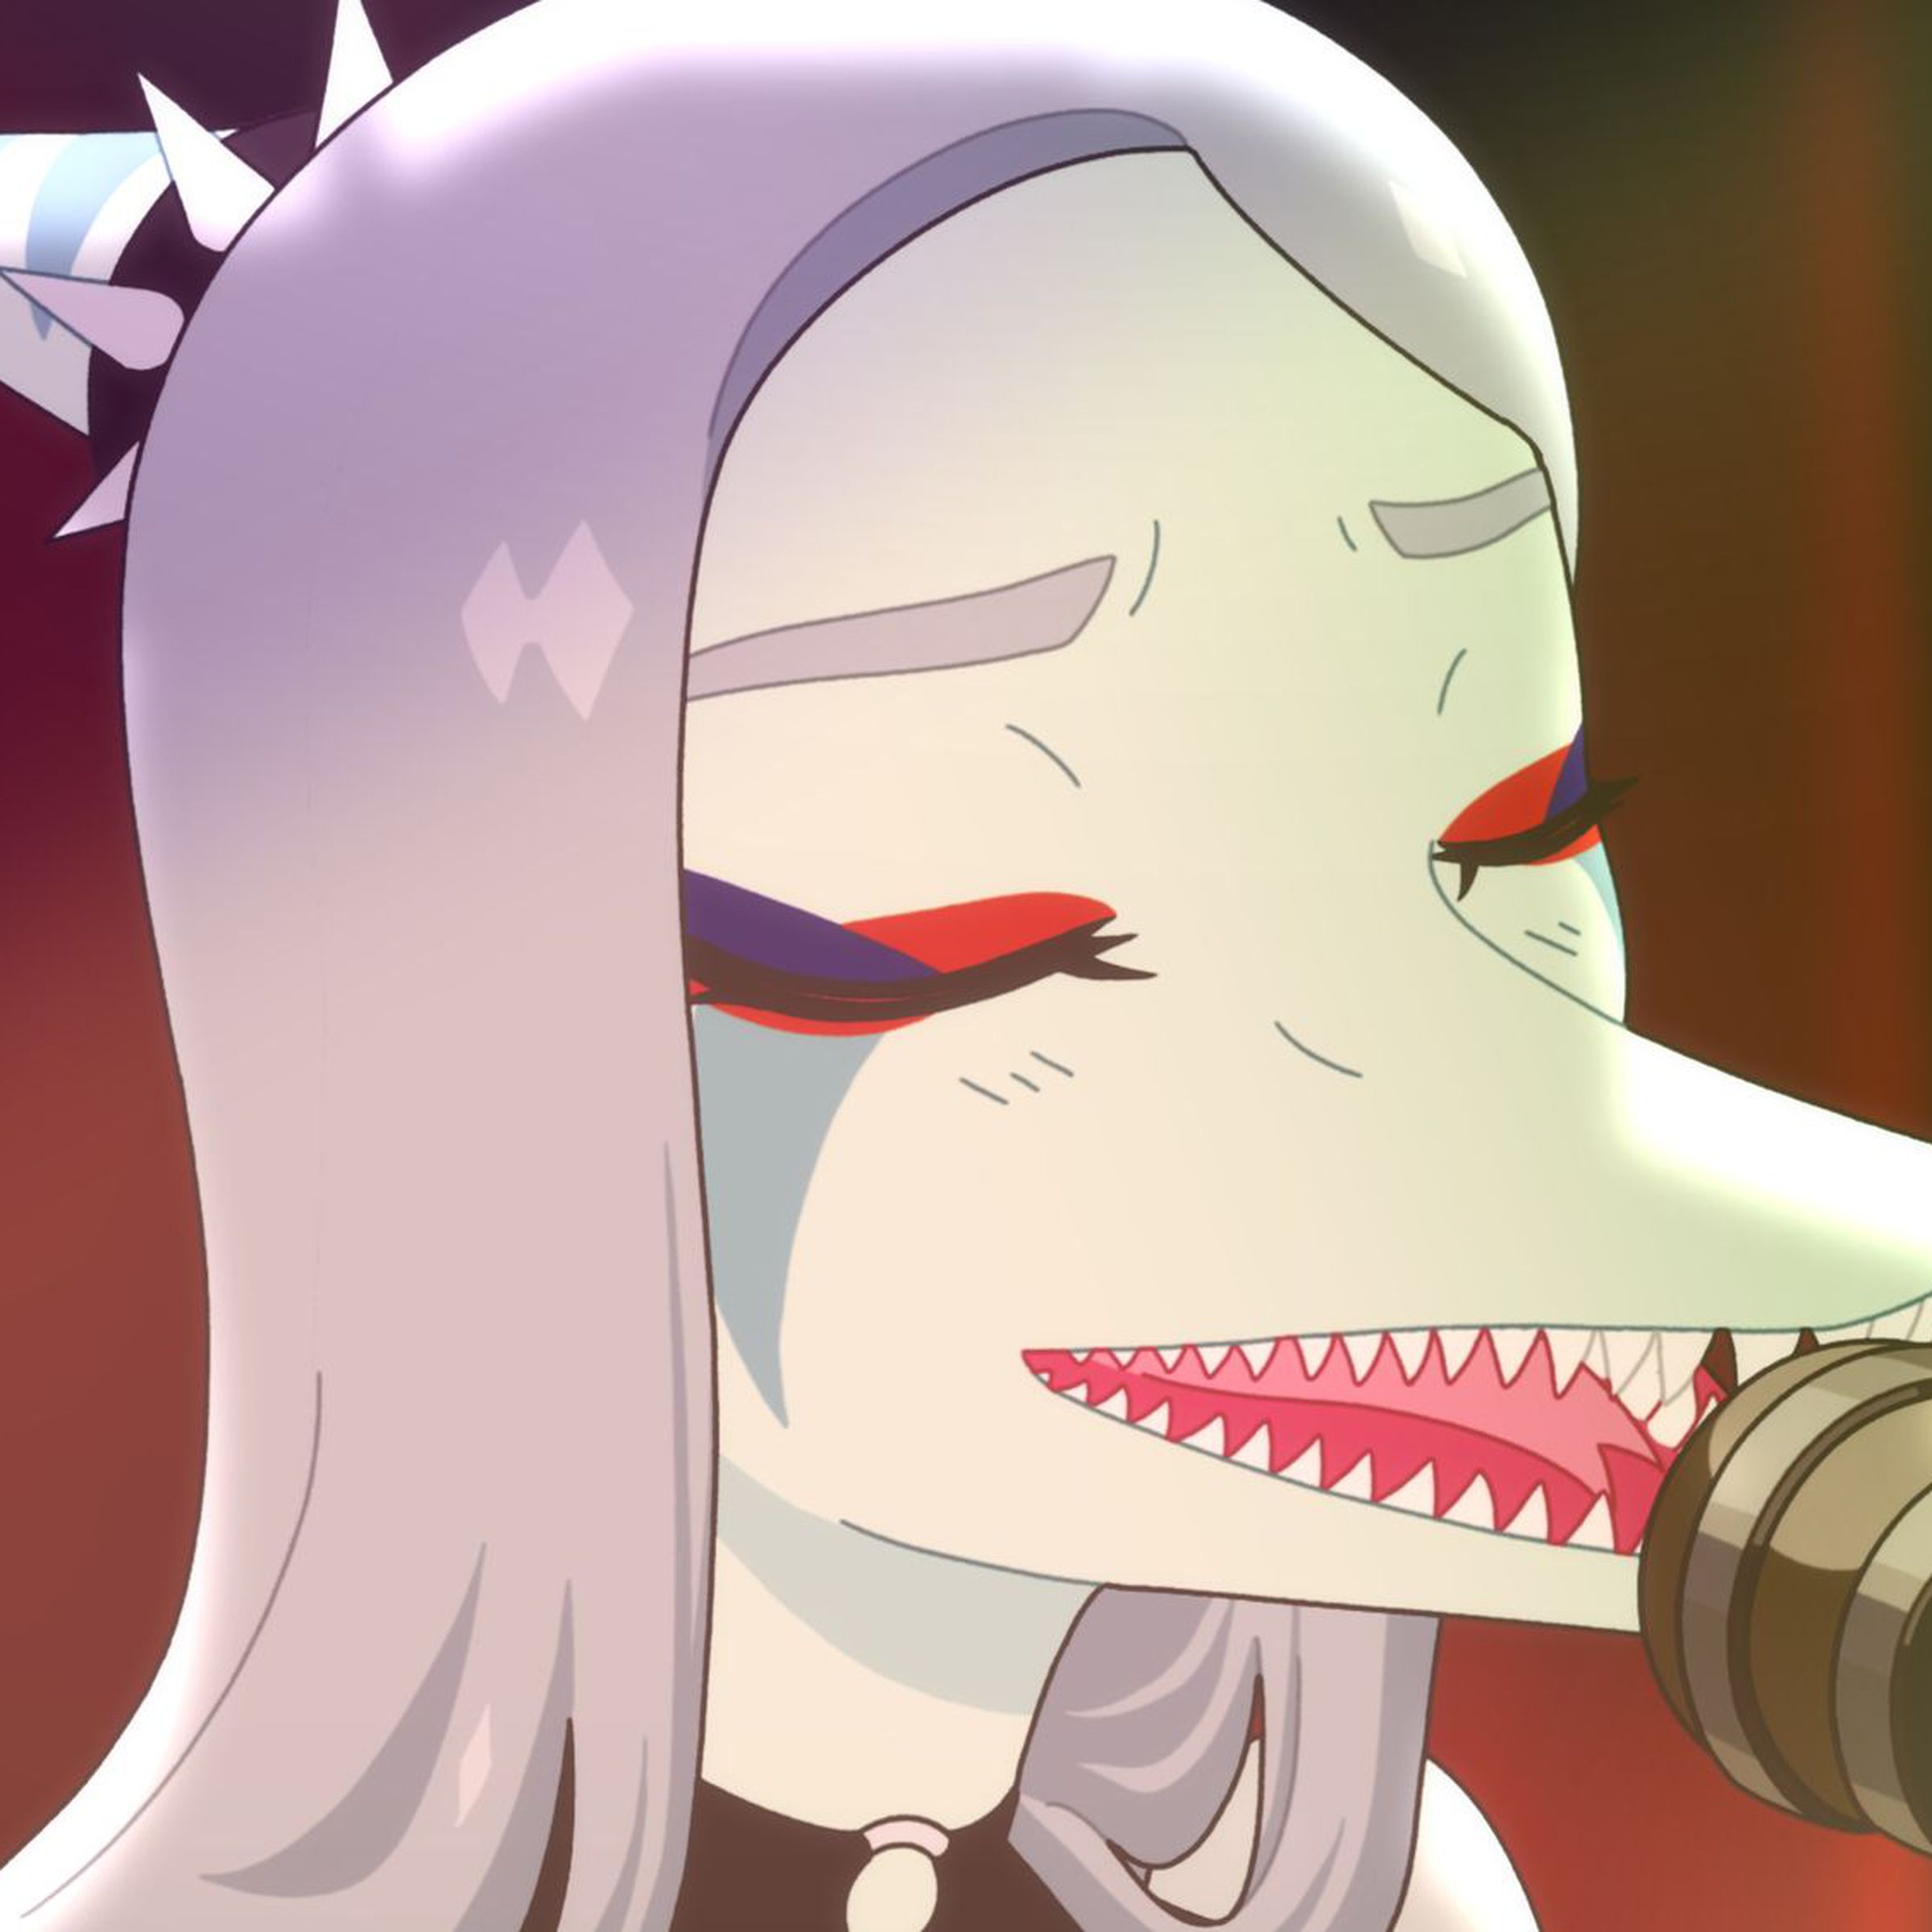 Screenshot from Goodbye Volcano High featuring the main character Fang